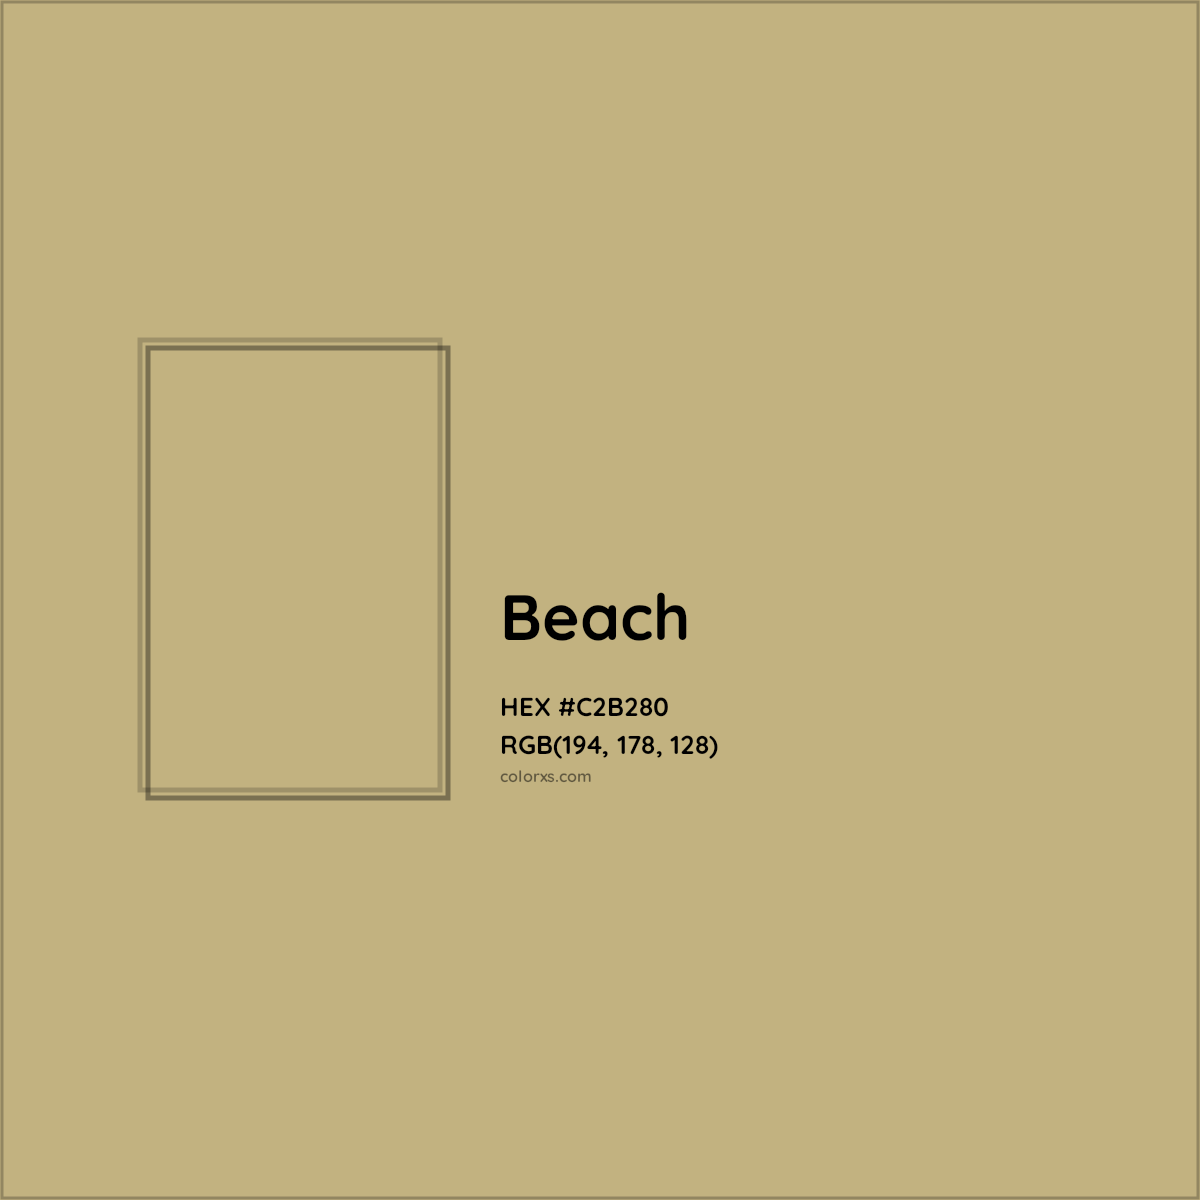 HEX #C2B280 Beach Other - Color Code